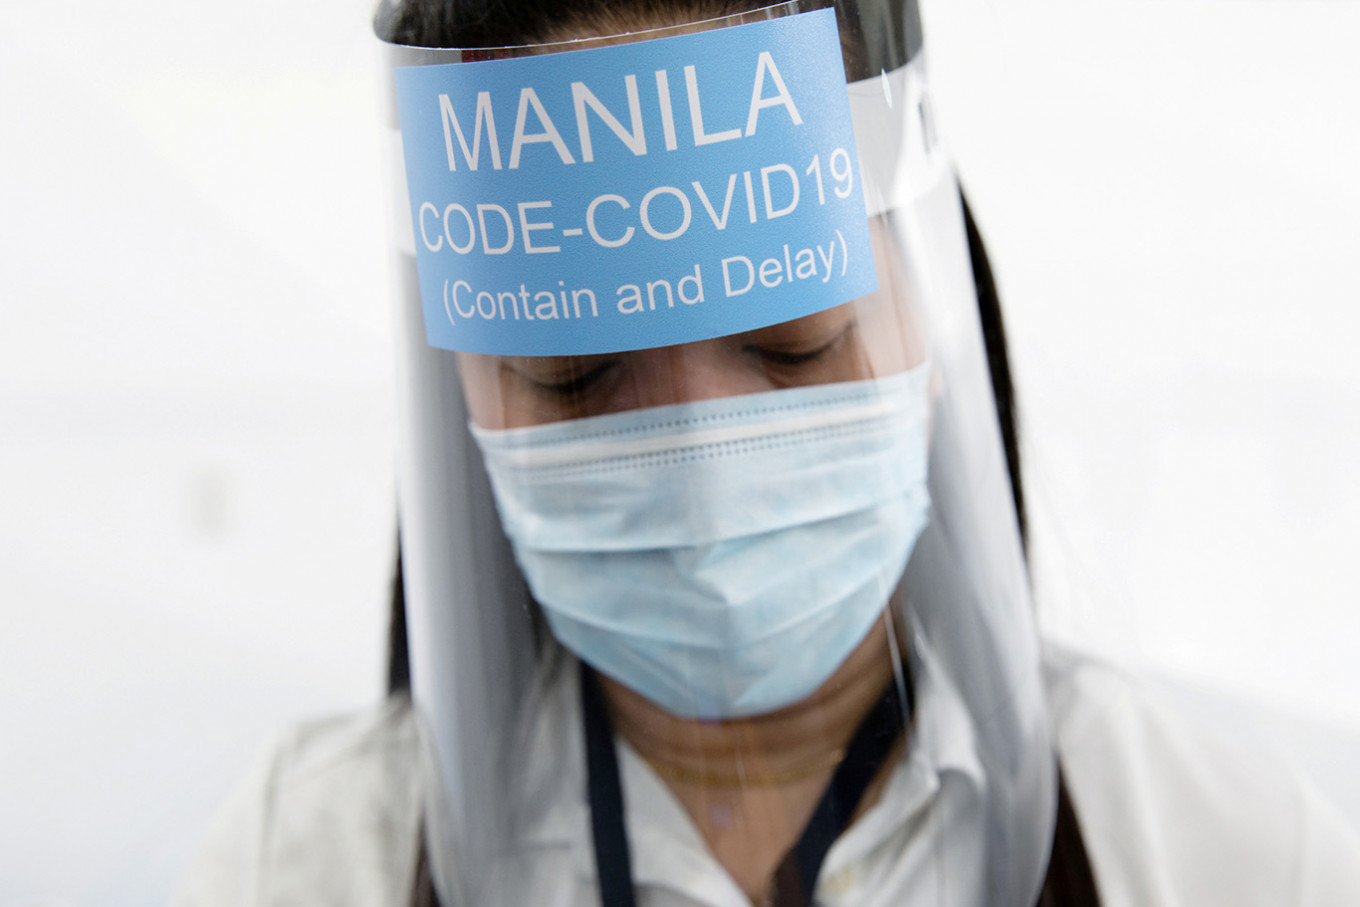 Philippines ramps up coronavirus testing to find thousands of unknown infections